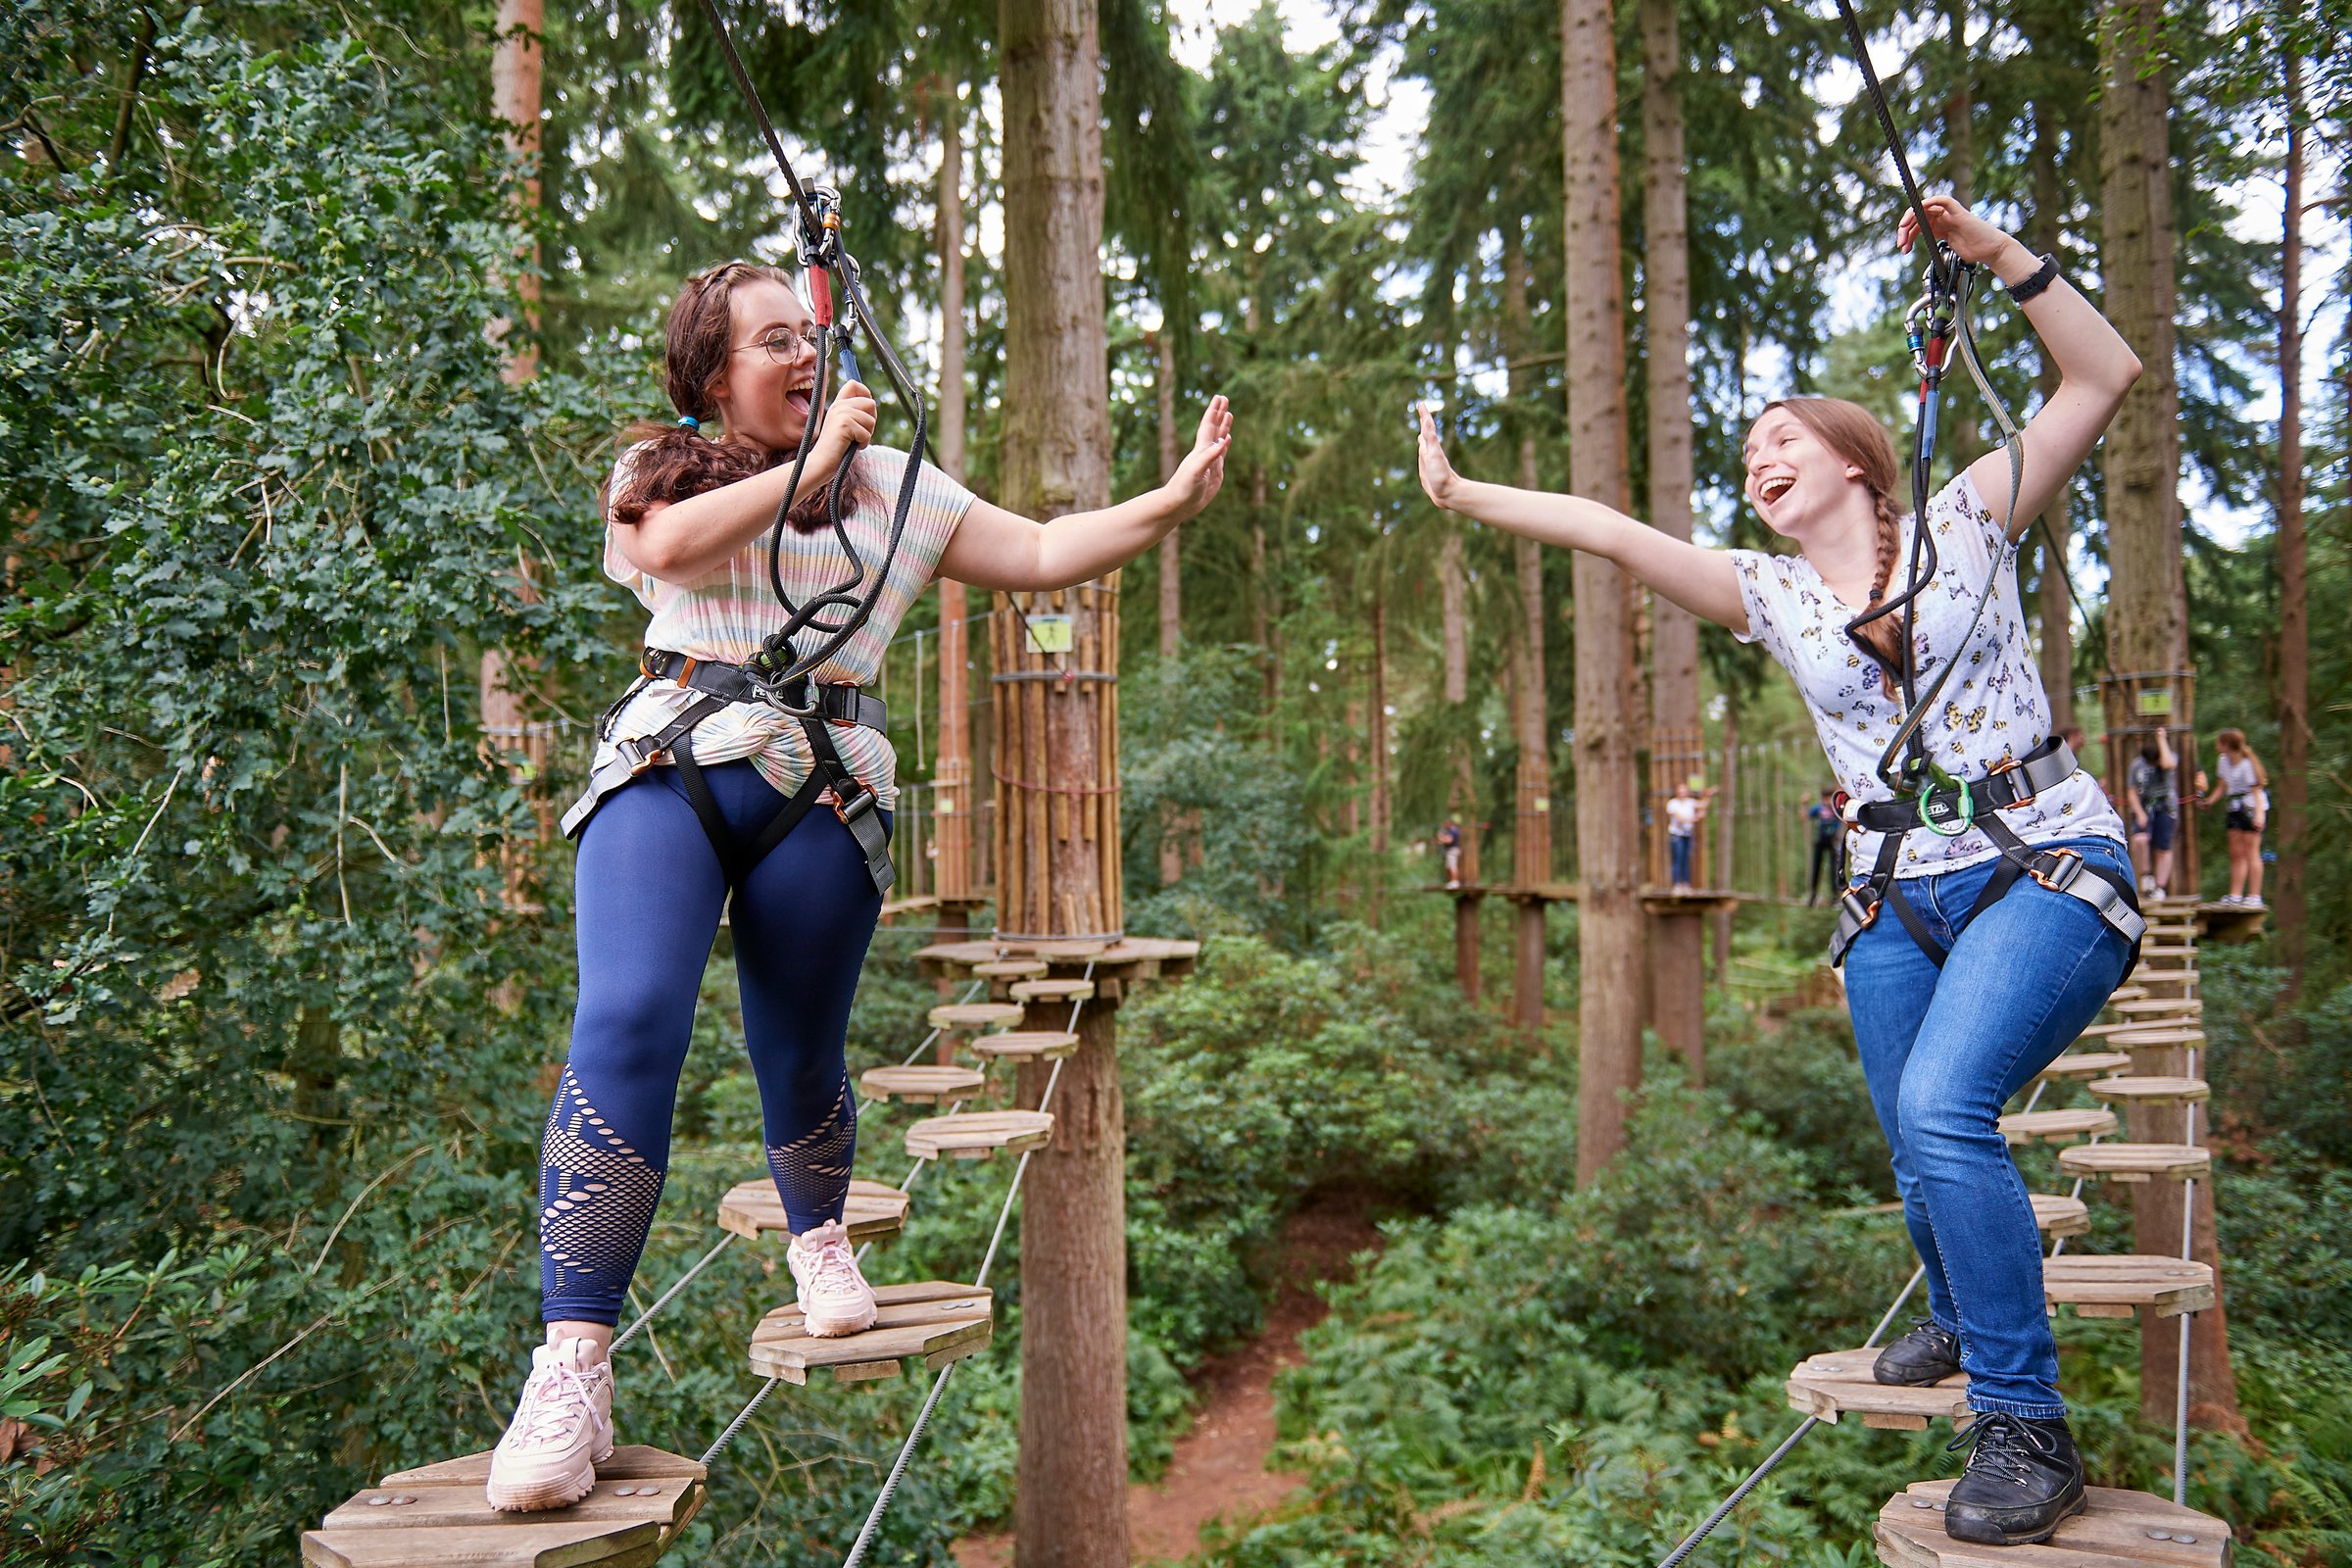 Go Ape: The story of a forest adventure